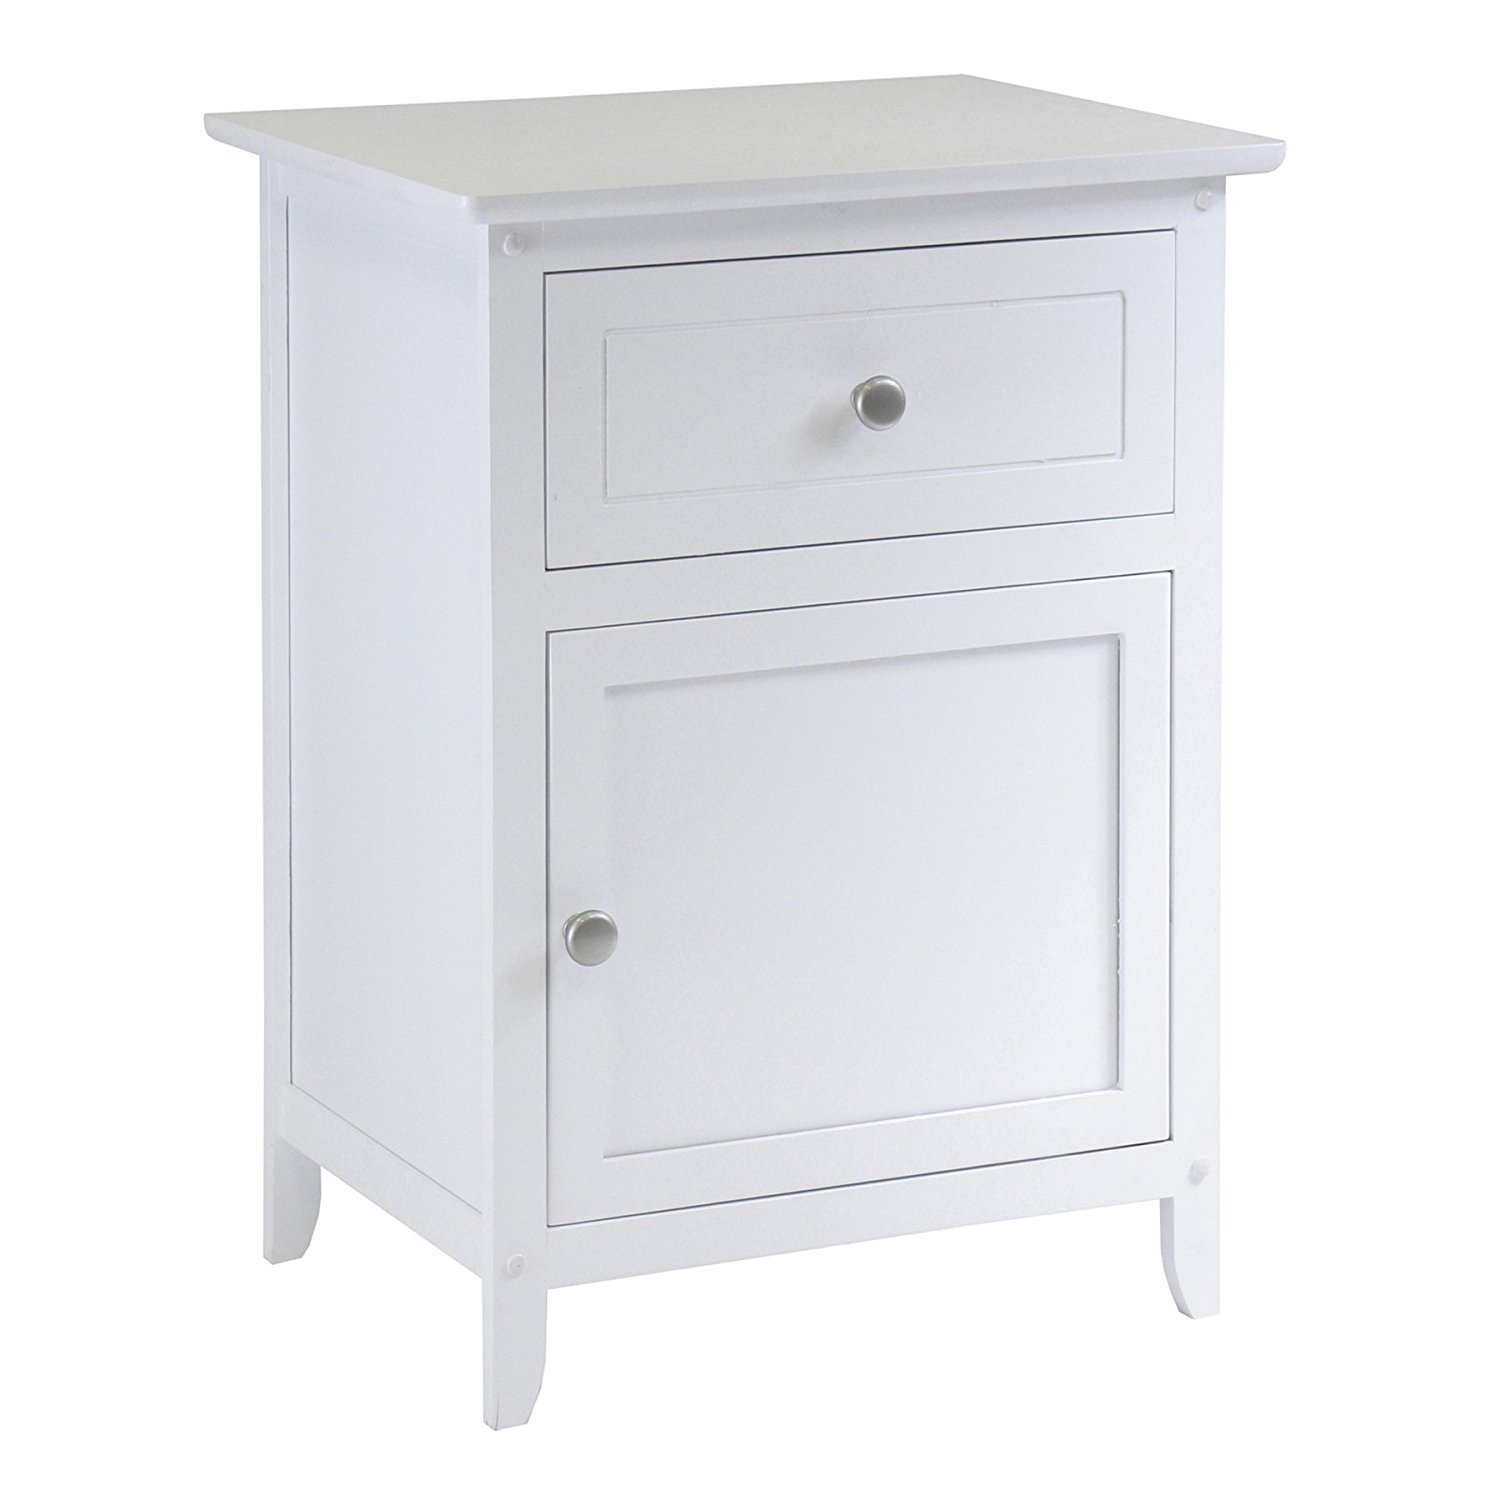 the super favorite mirrored espresso nightstand gallery hotxpress top awesome nightstands for bedside table tall cabinets finesse glass bedroom furniture sears clearance